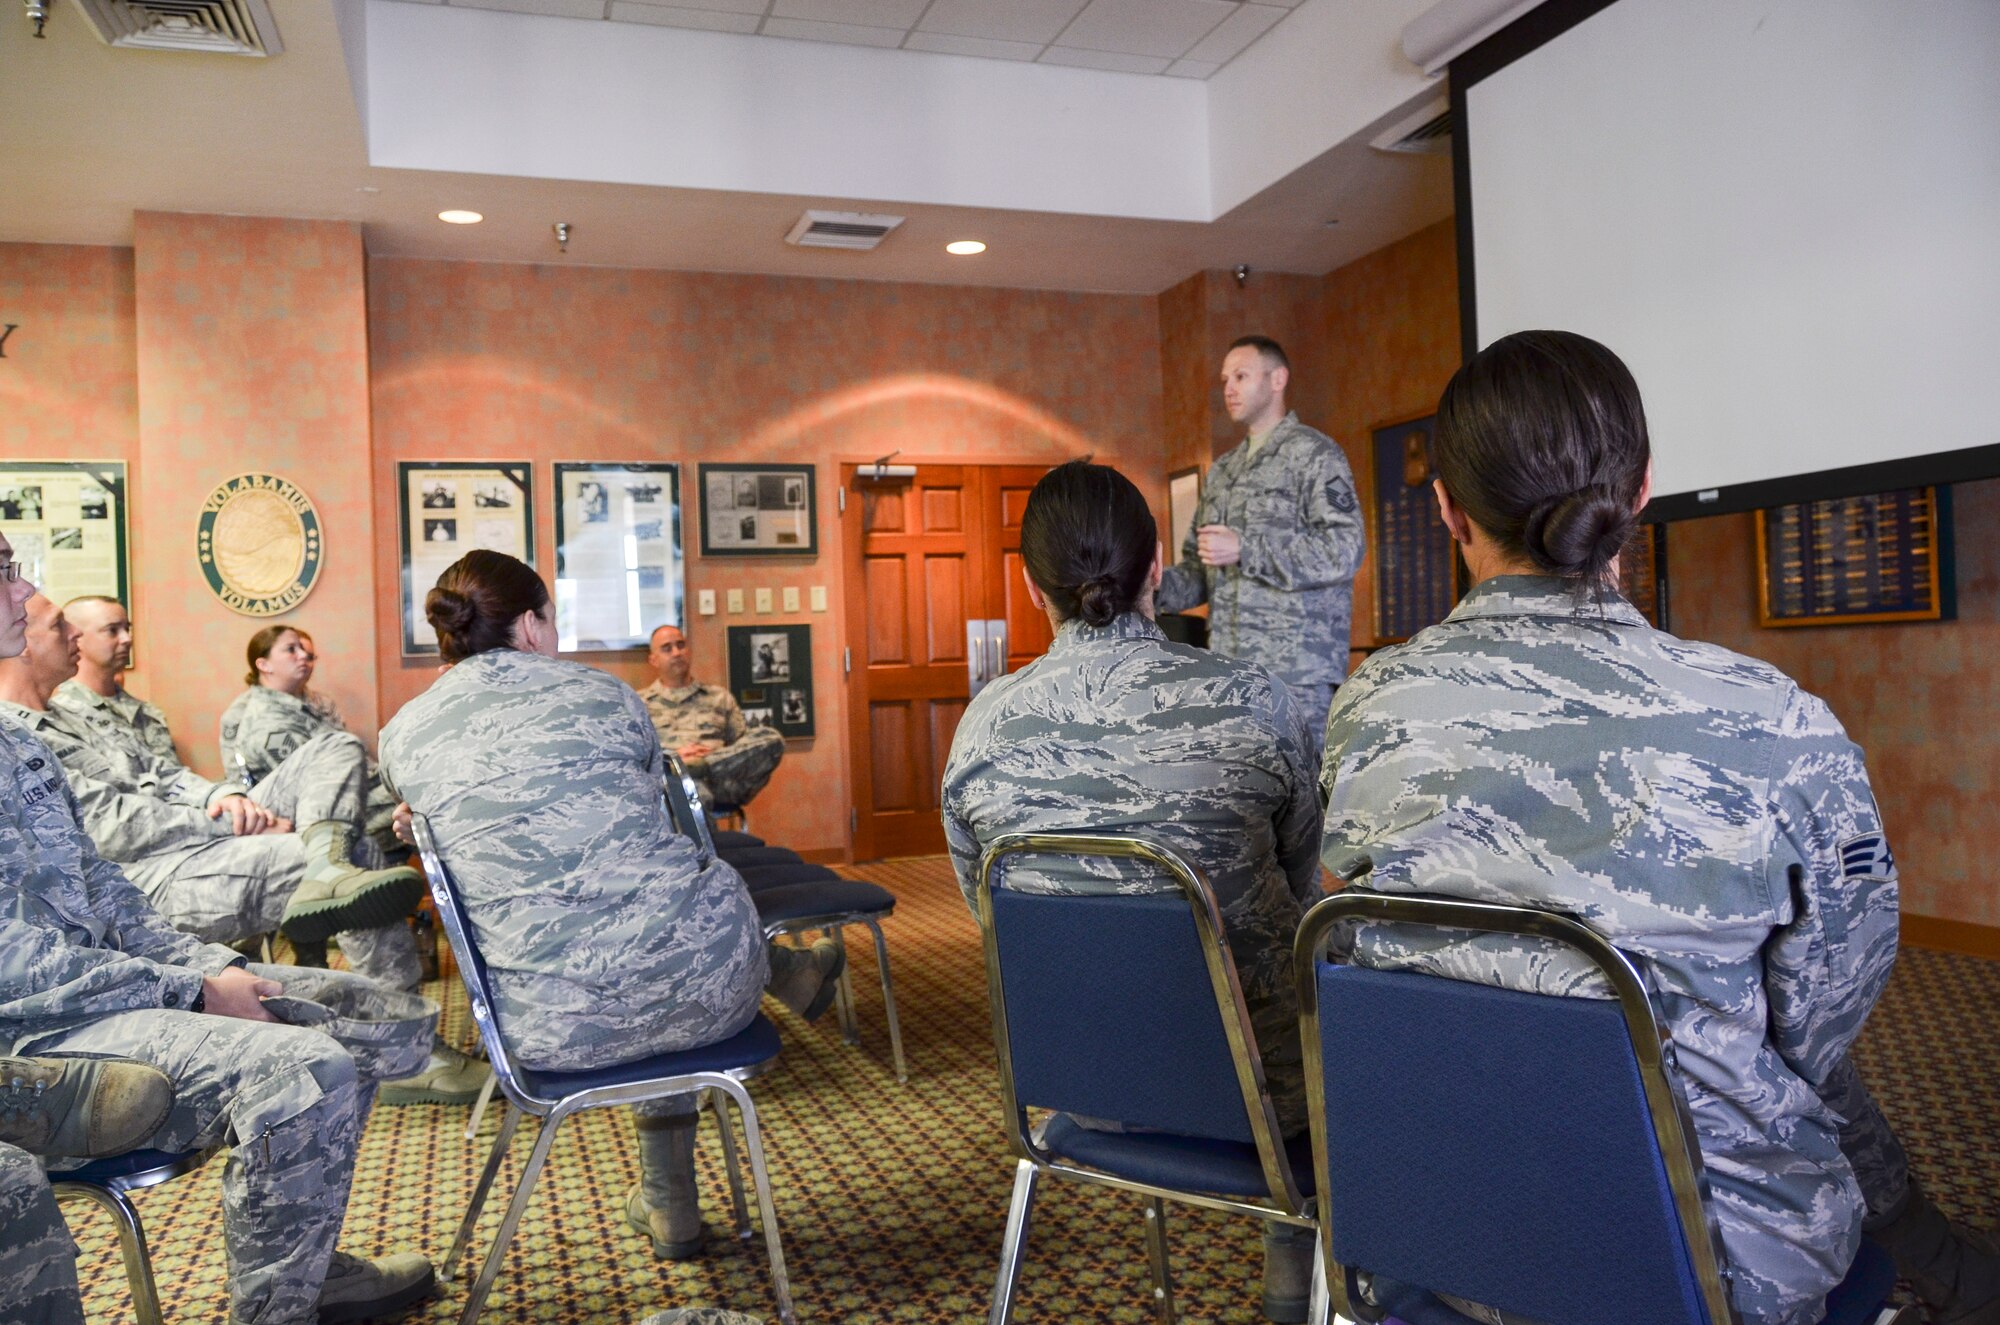 Members from 12th Air Force (Air Forces Southern) listen while Master Sgt. Nathan Clark, 612th Operations Superintendent, speaks during the Sexual Assault Prevention and Response down day at Davis-Monthan Air Force Base, Ariz., Sept. 5, 2013. The purpose of the down day was to take a pause in the day-to-day mission to reiterate zero tolerance of sexual assault and focus on fostering a climate of dignity and respect in the Air Force. Military leaders from every level call on Airmen to not be part of the problem, but part of the solution in the movement toward a new culture that aims to rid sexual assault from the ranks. (U.S. Air Force photo by Staff Sgt. Adam Grant/Released)